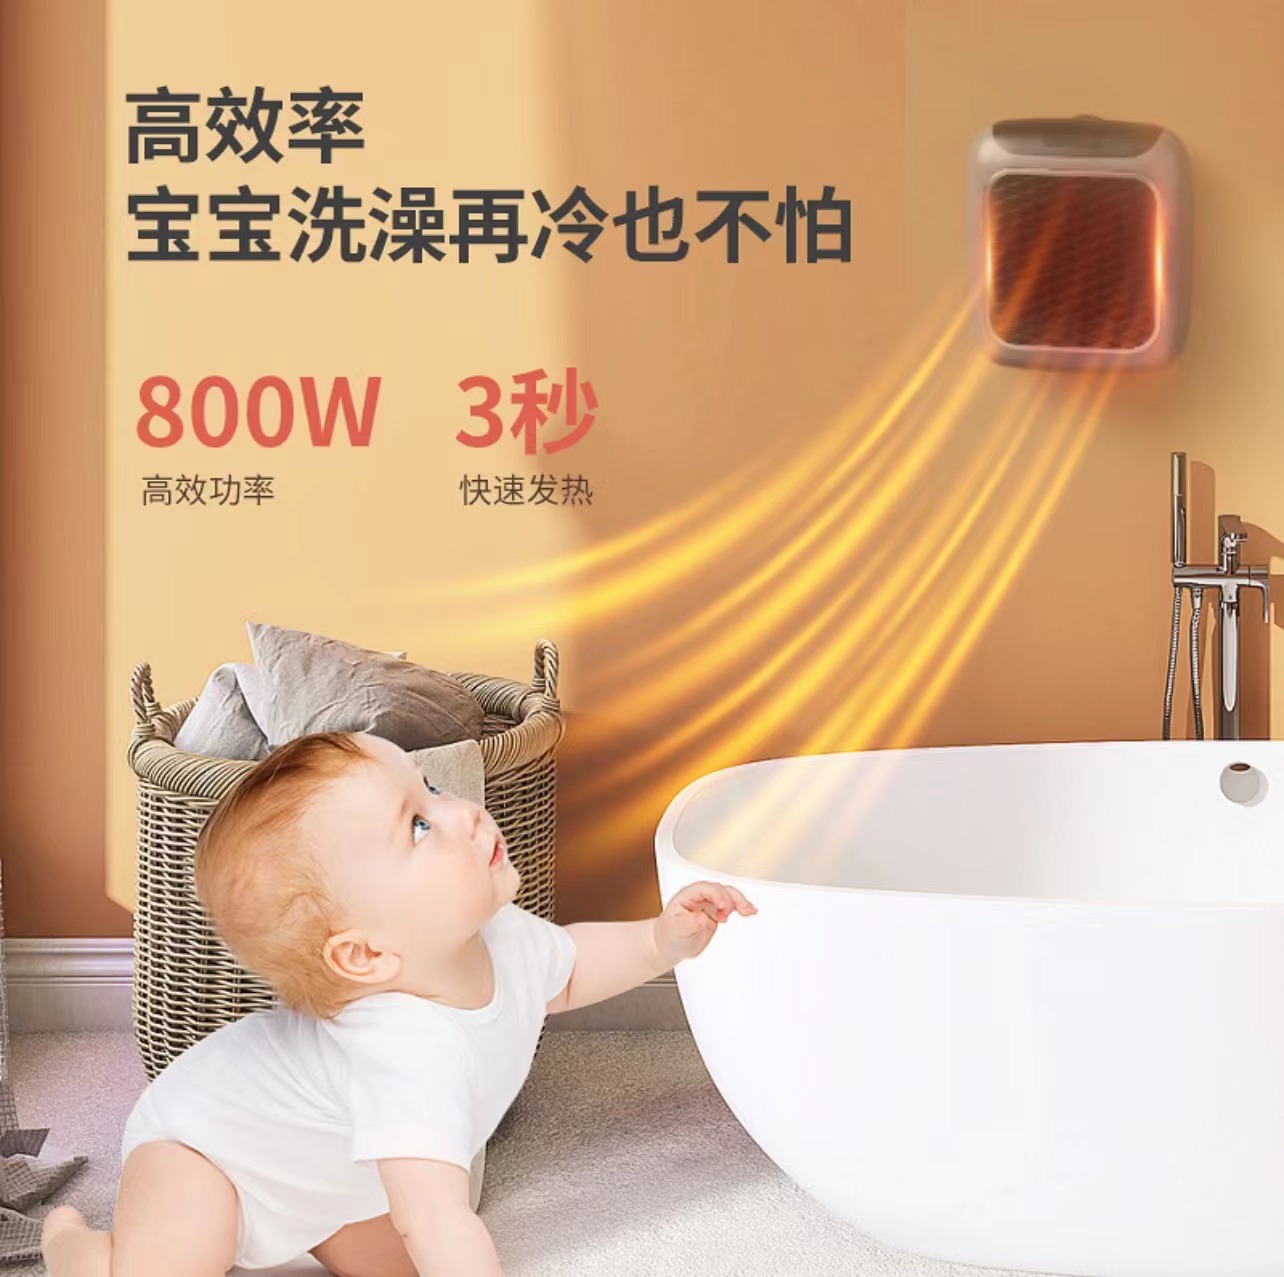 Mini Fan Heater Wall-Mounted Remote Control High Power Fantastic Heating Appliance Home Dormitory Office Fast Heating Heater